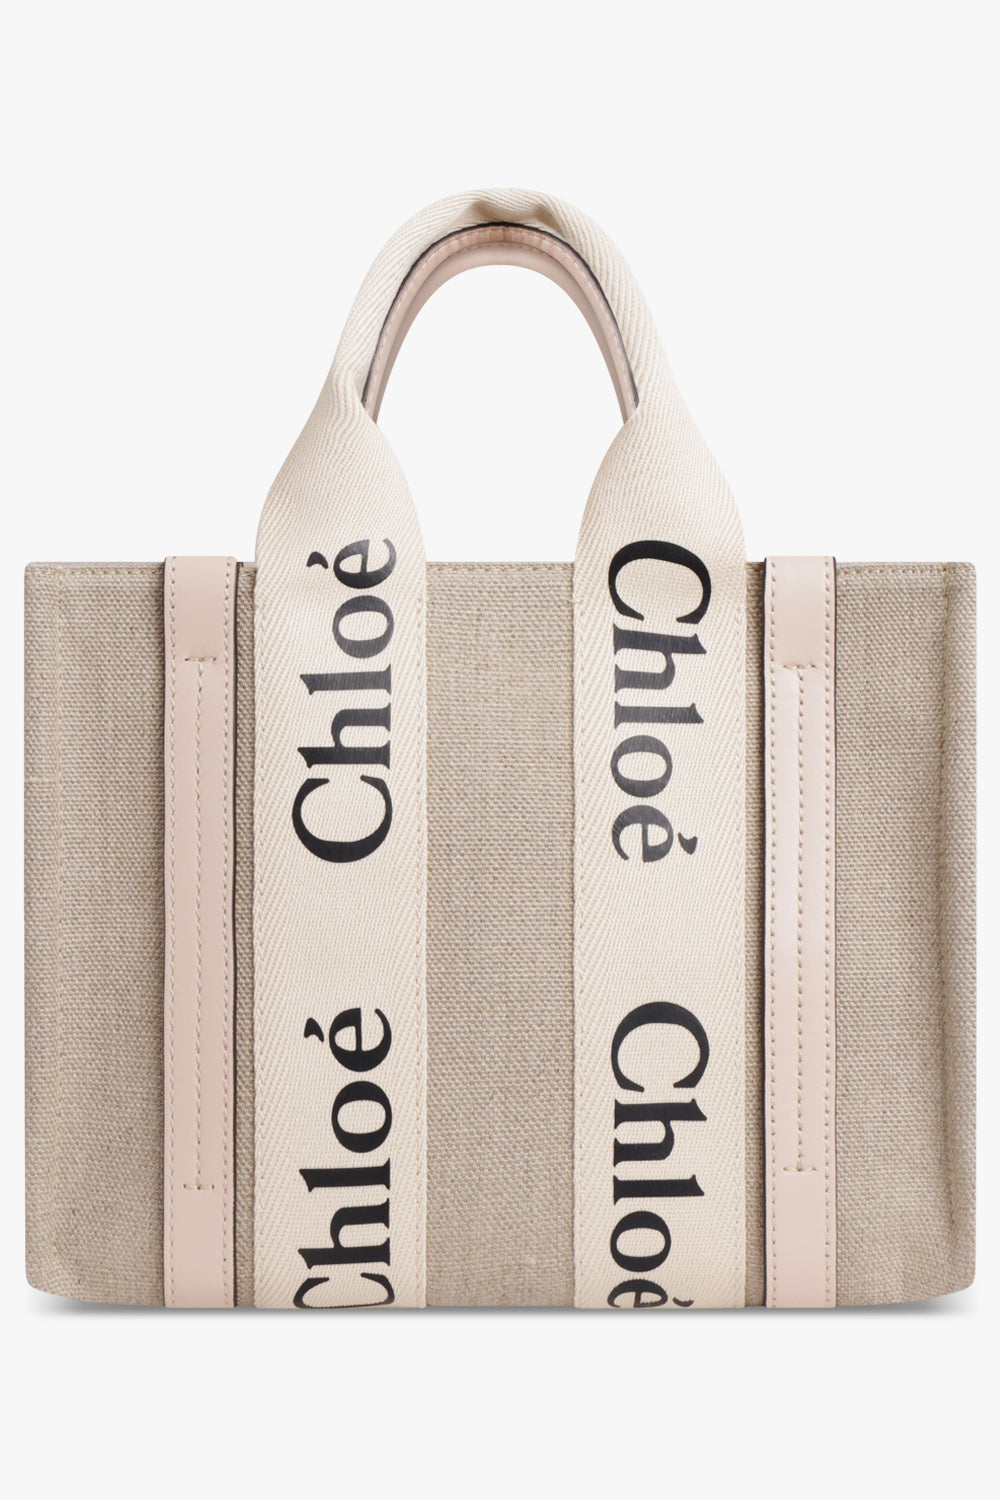 CHLOE BAGS Pink Woody Small Tote | Cement Pink